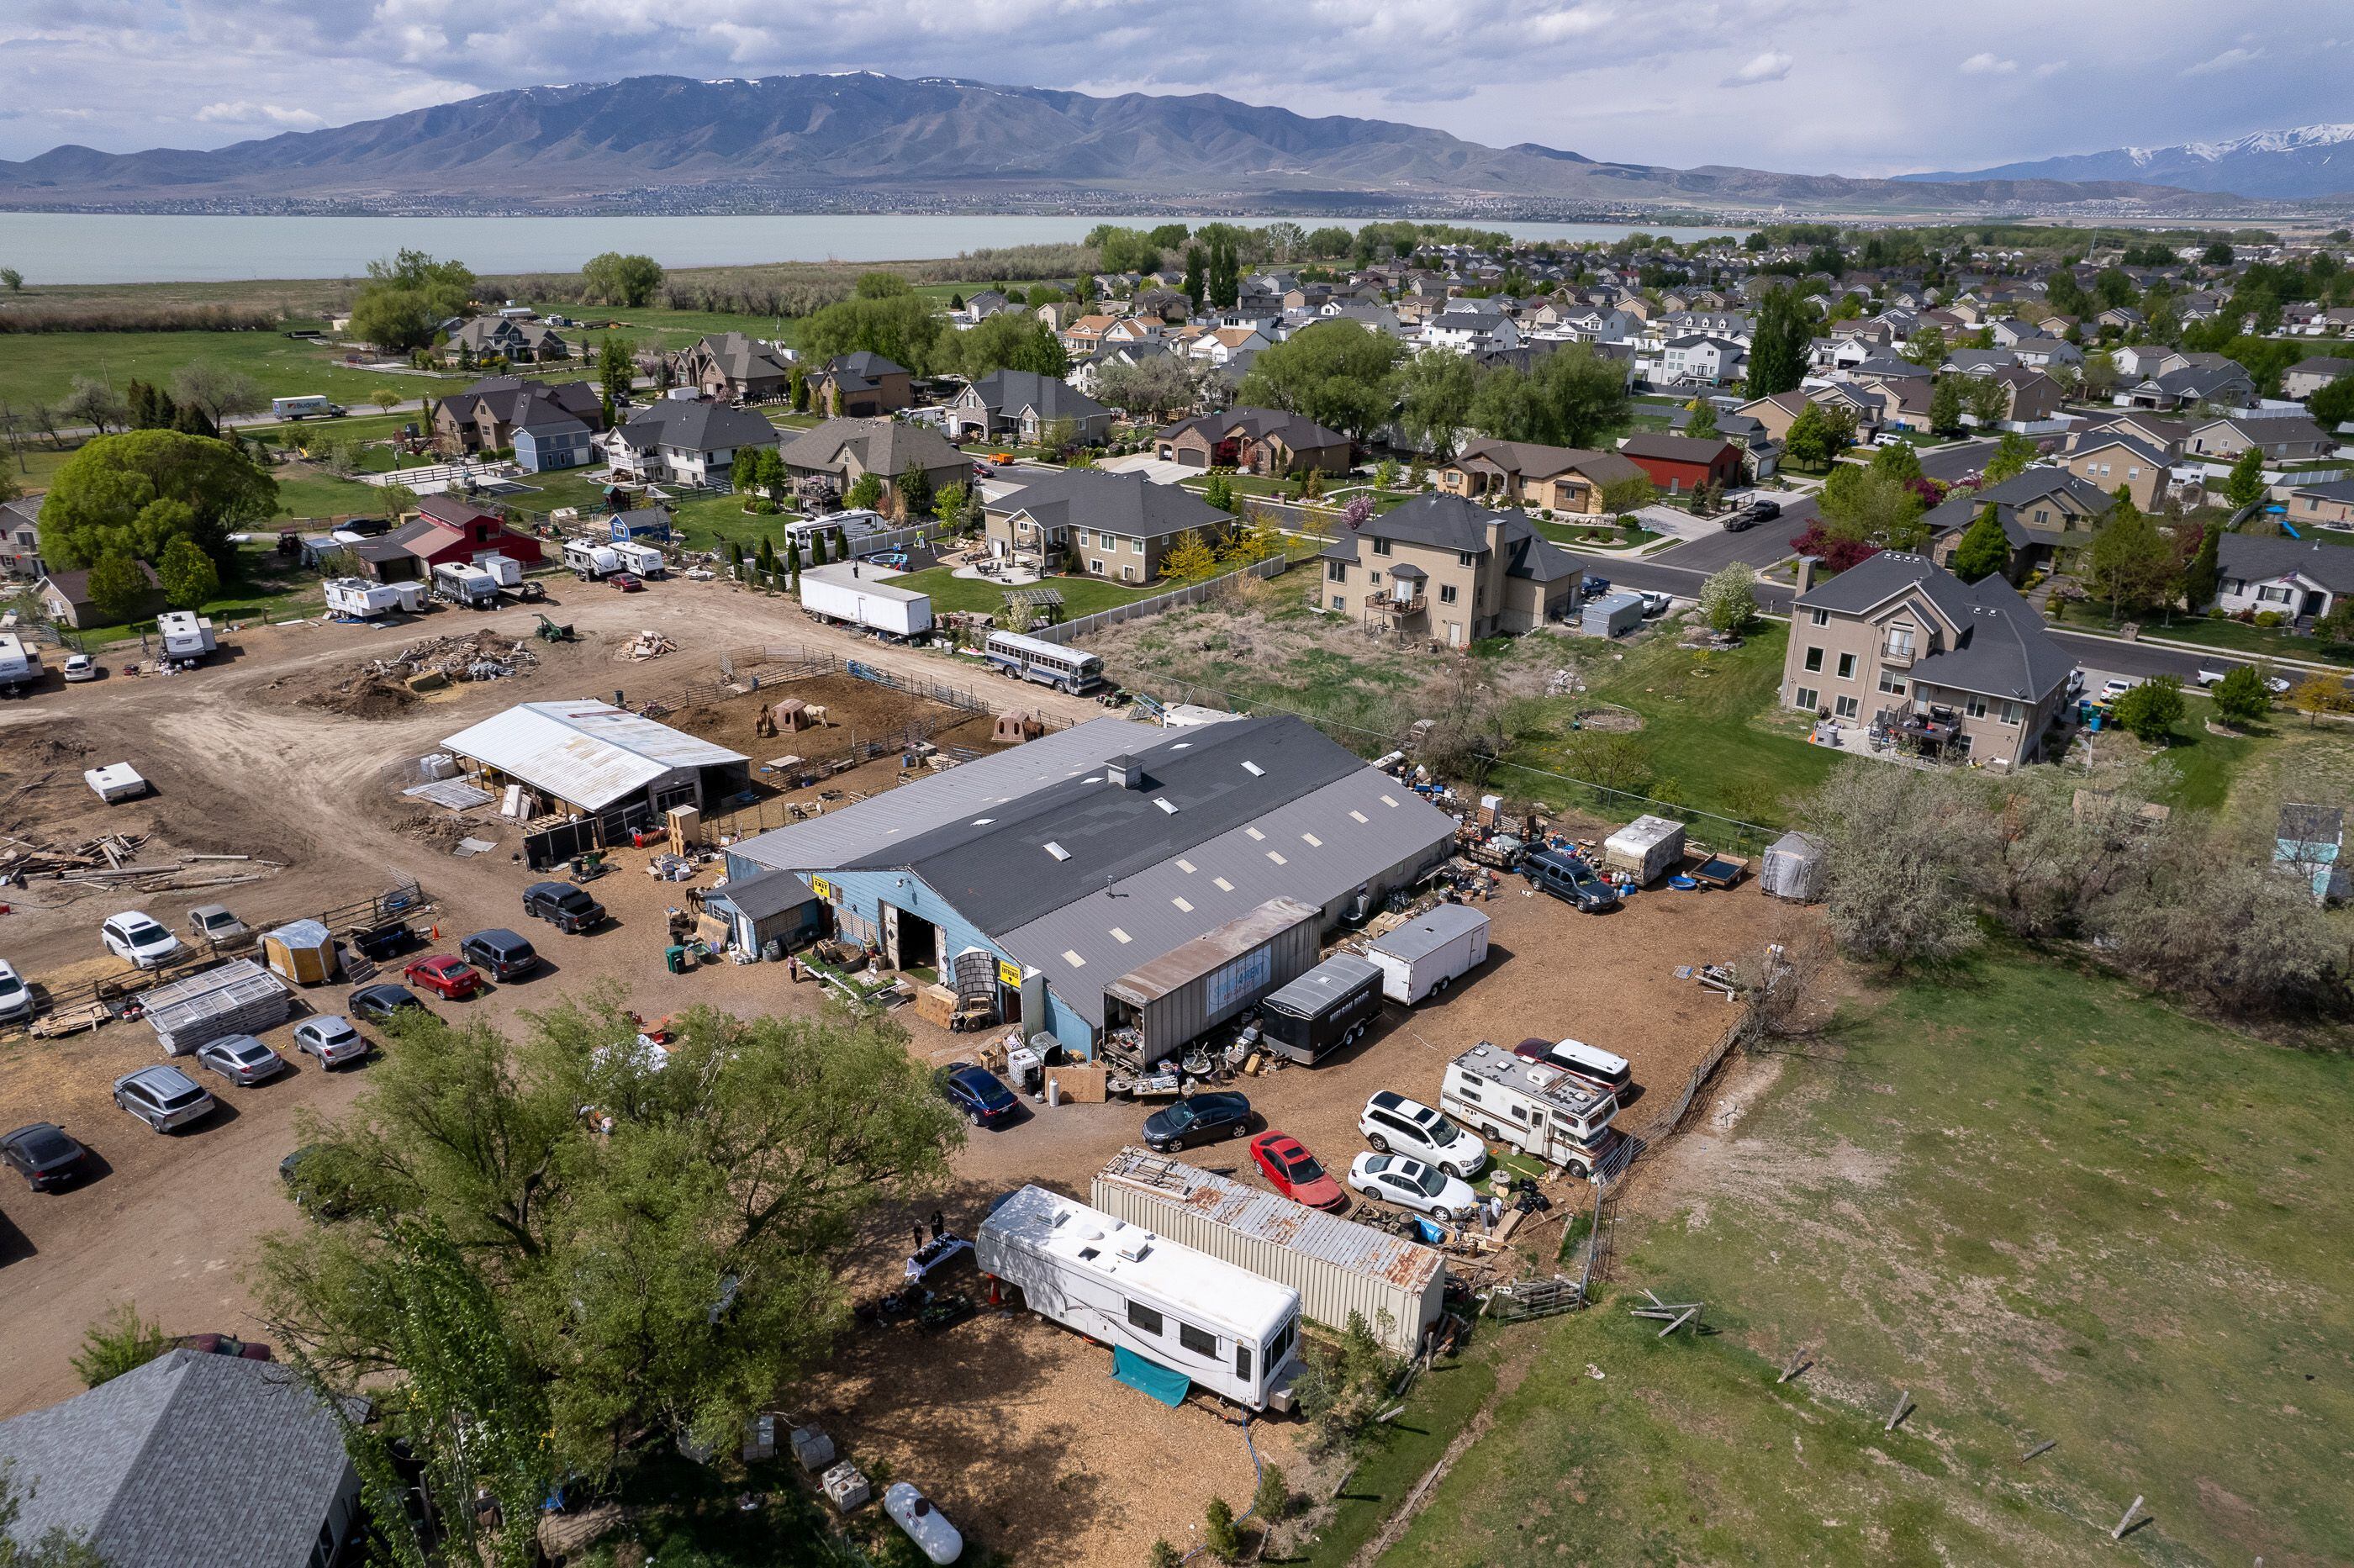 (Trent Nelson | The Salt Lake Tribune) The Lehi Farmers Market property in Utah County, and neighboring homes, on Saturday, May 13, 2023.